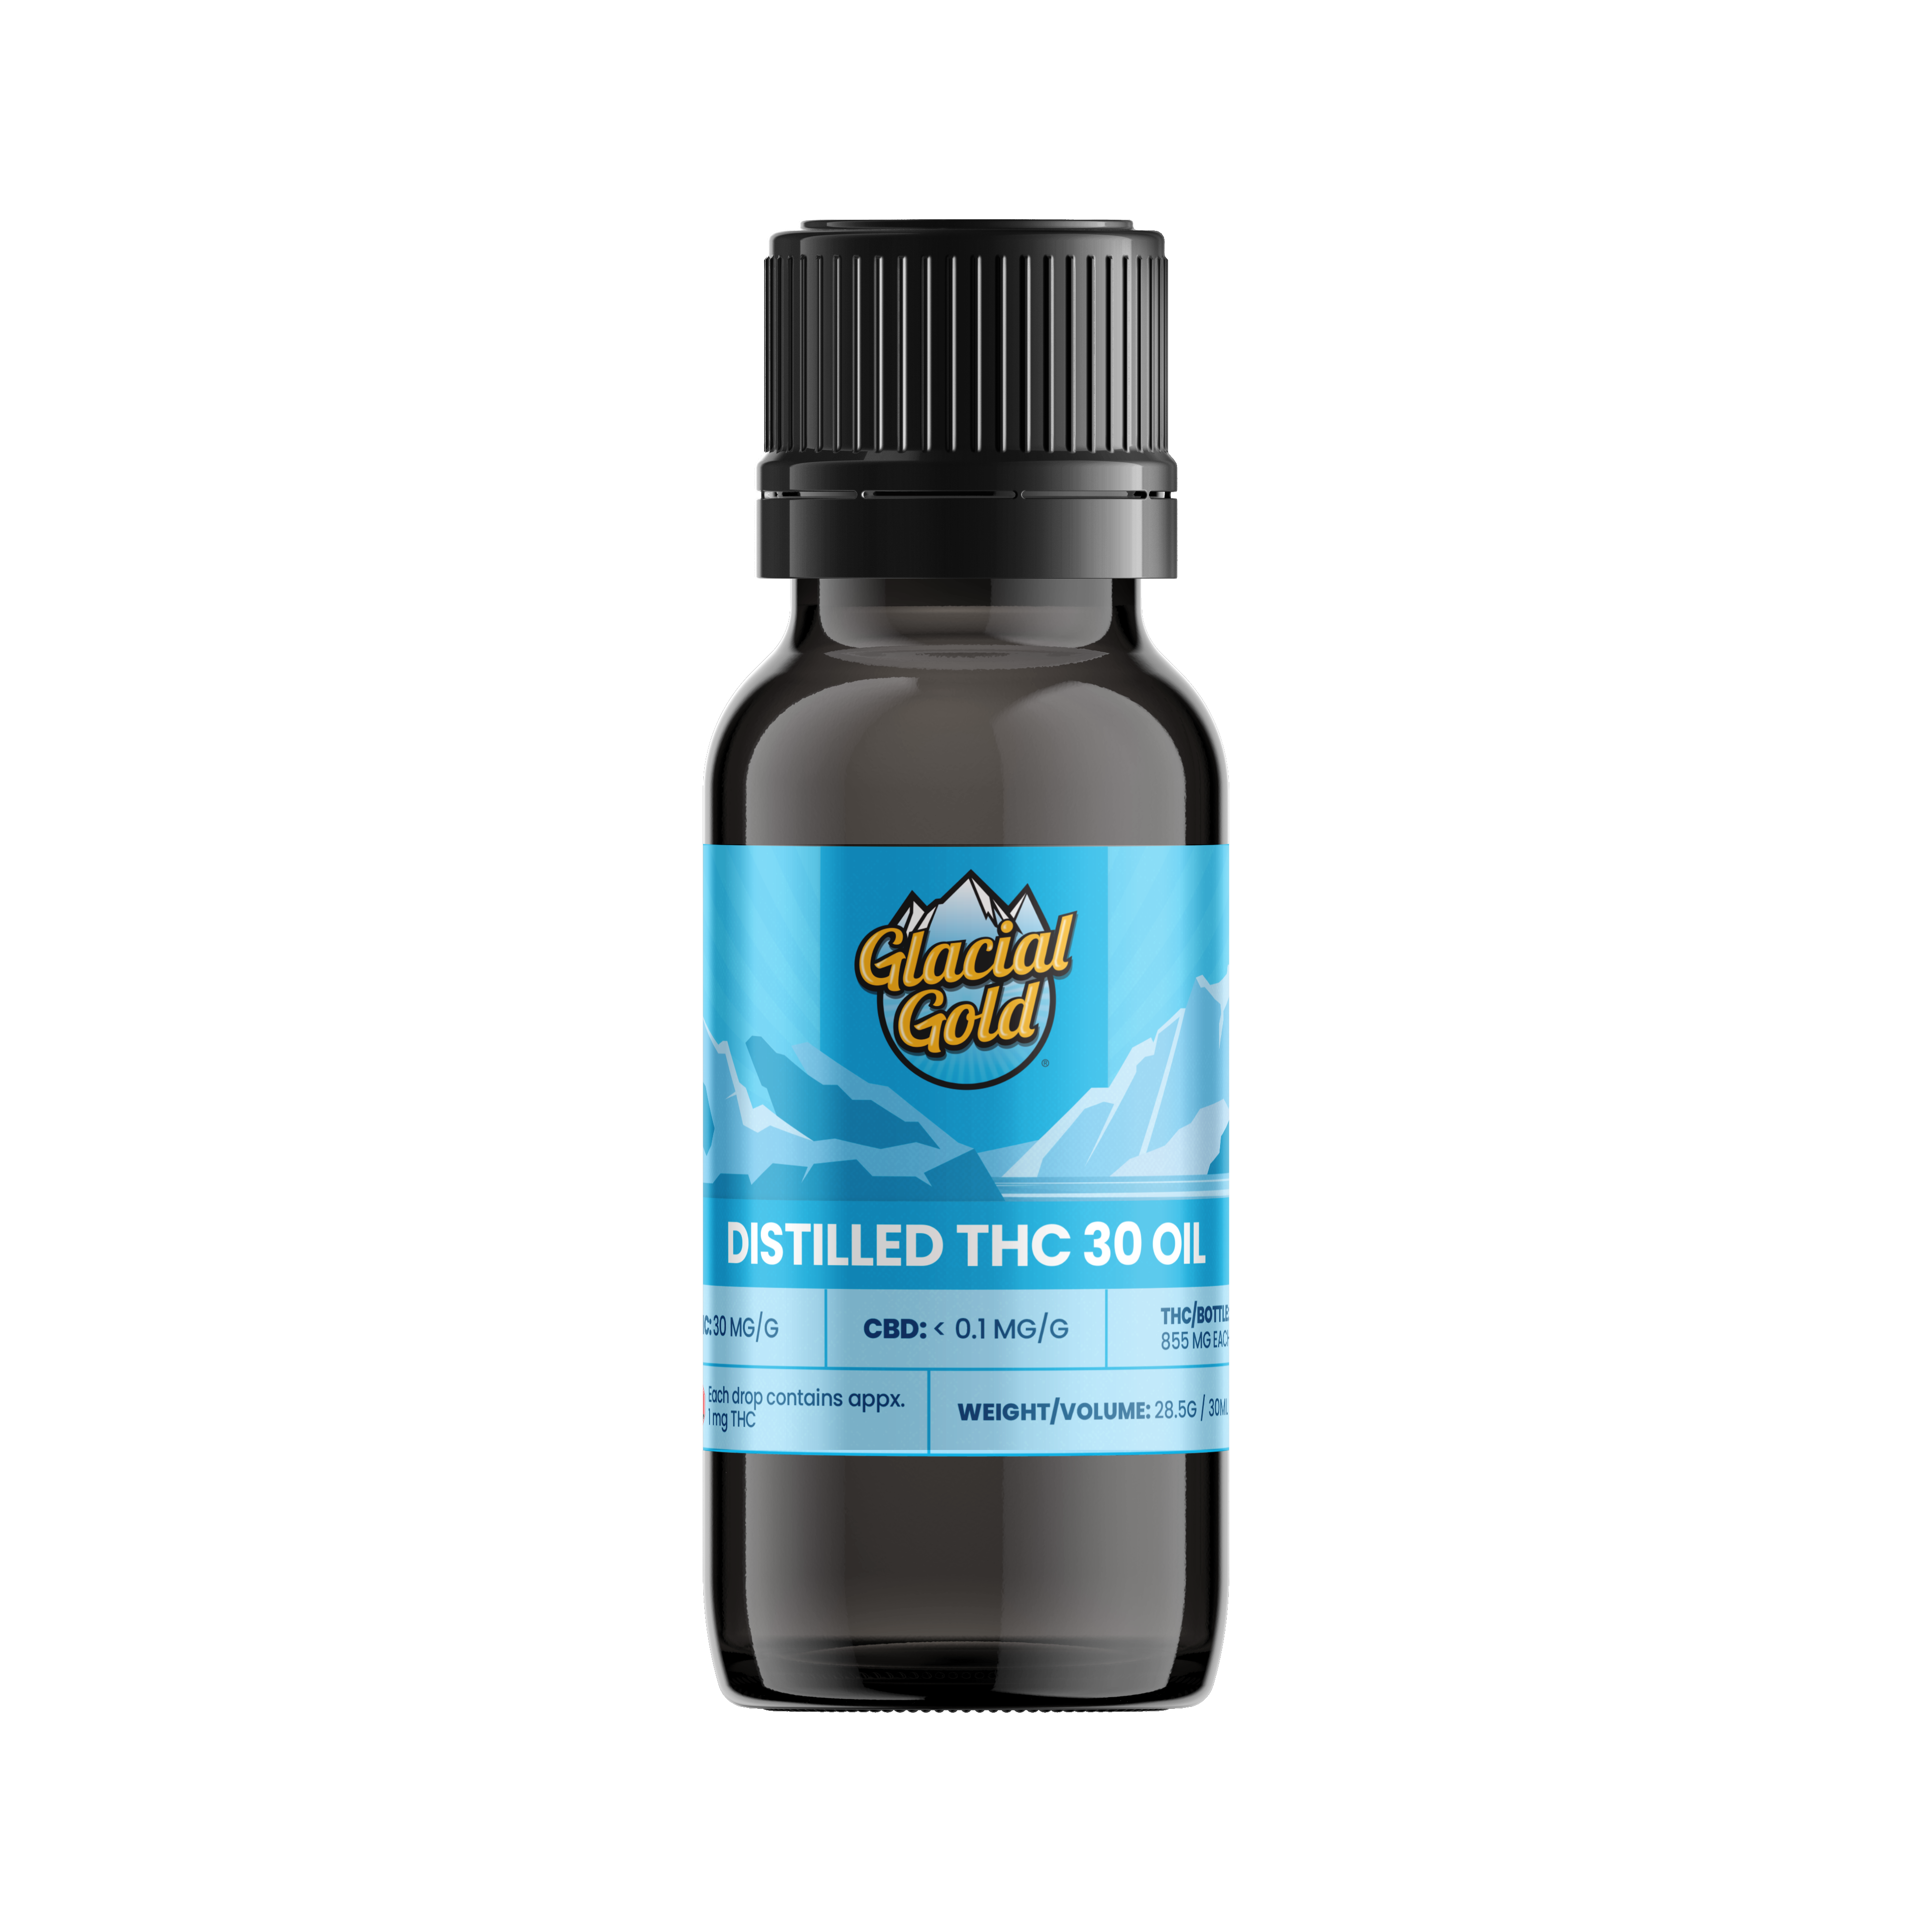 Cannabis Product Distilled THC 30 Oil by Glacial Gold